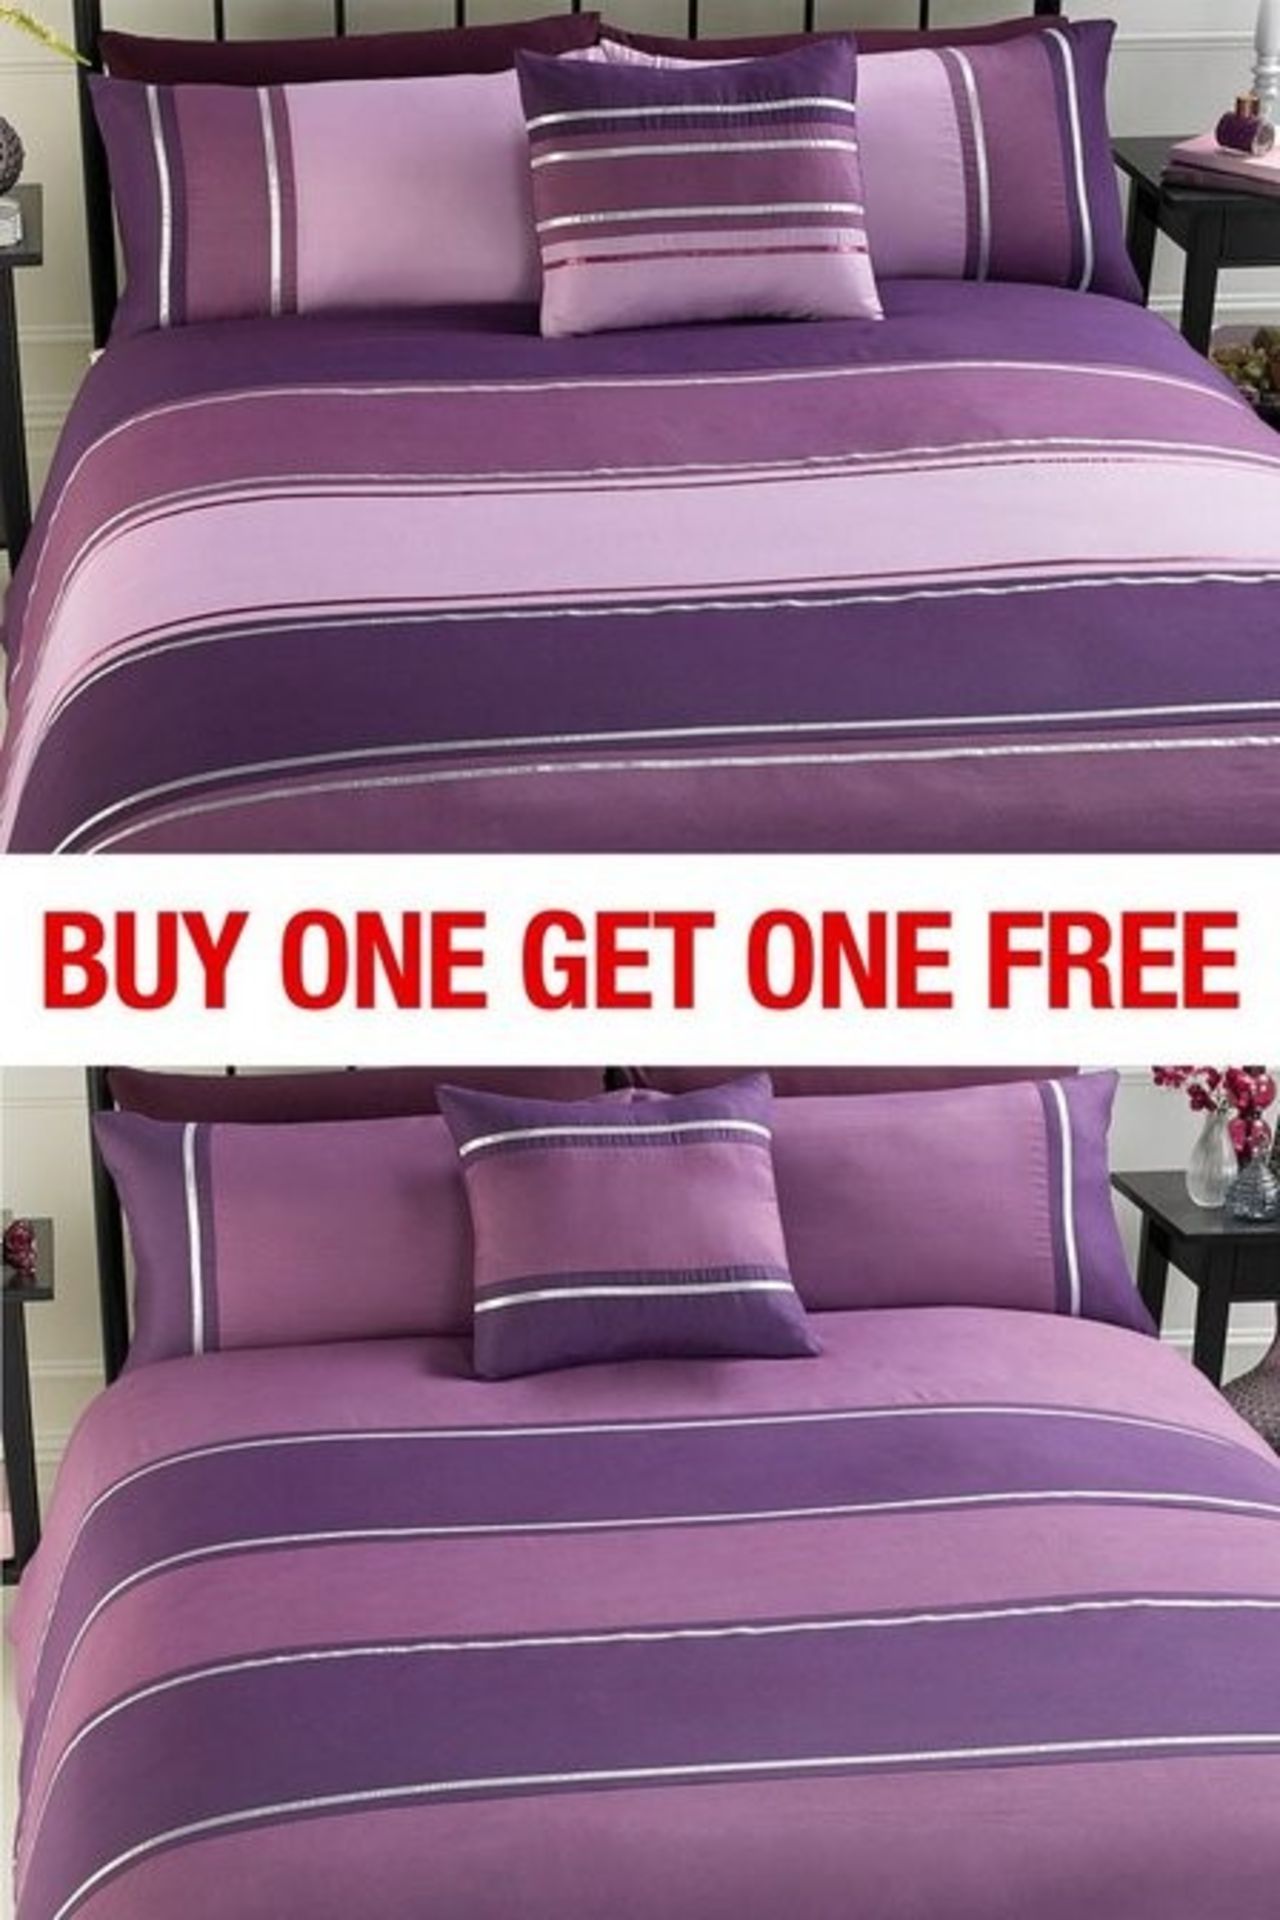 1 AS NEW BAGGED LINEAR BOGOF KING DUVET SET IN PLUM (VIEWING HIGHLY RECOMMENDED)